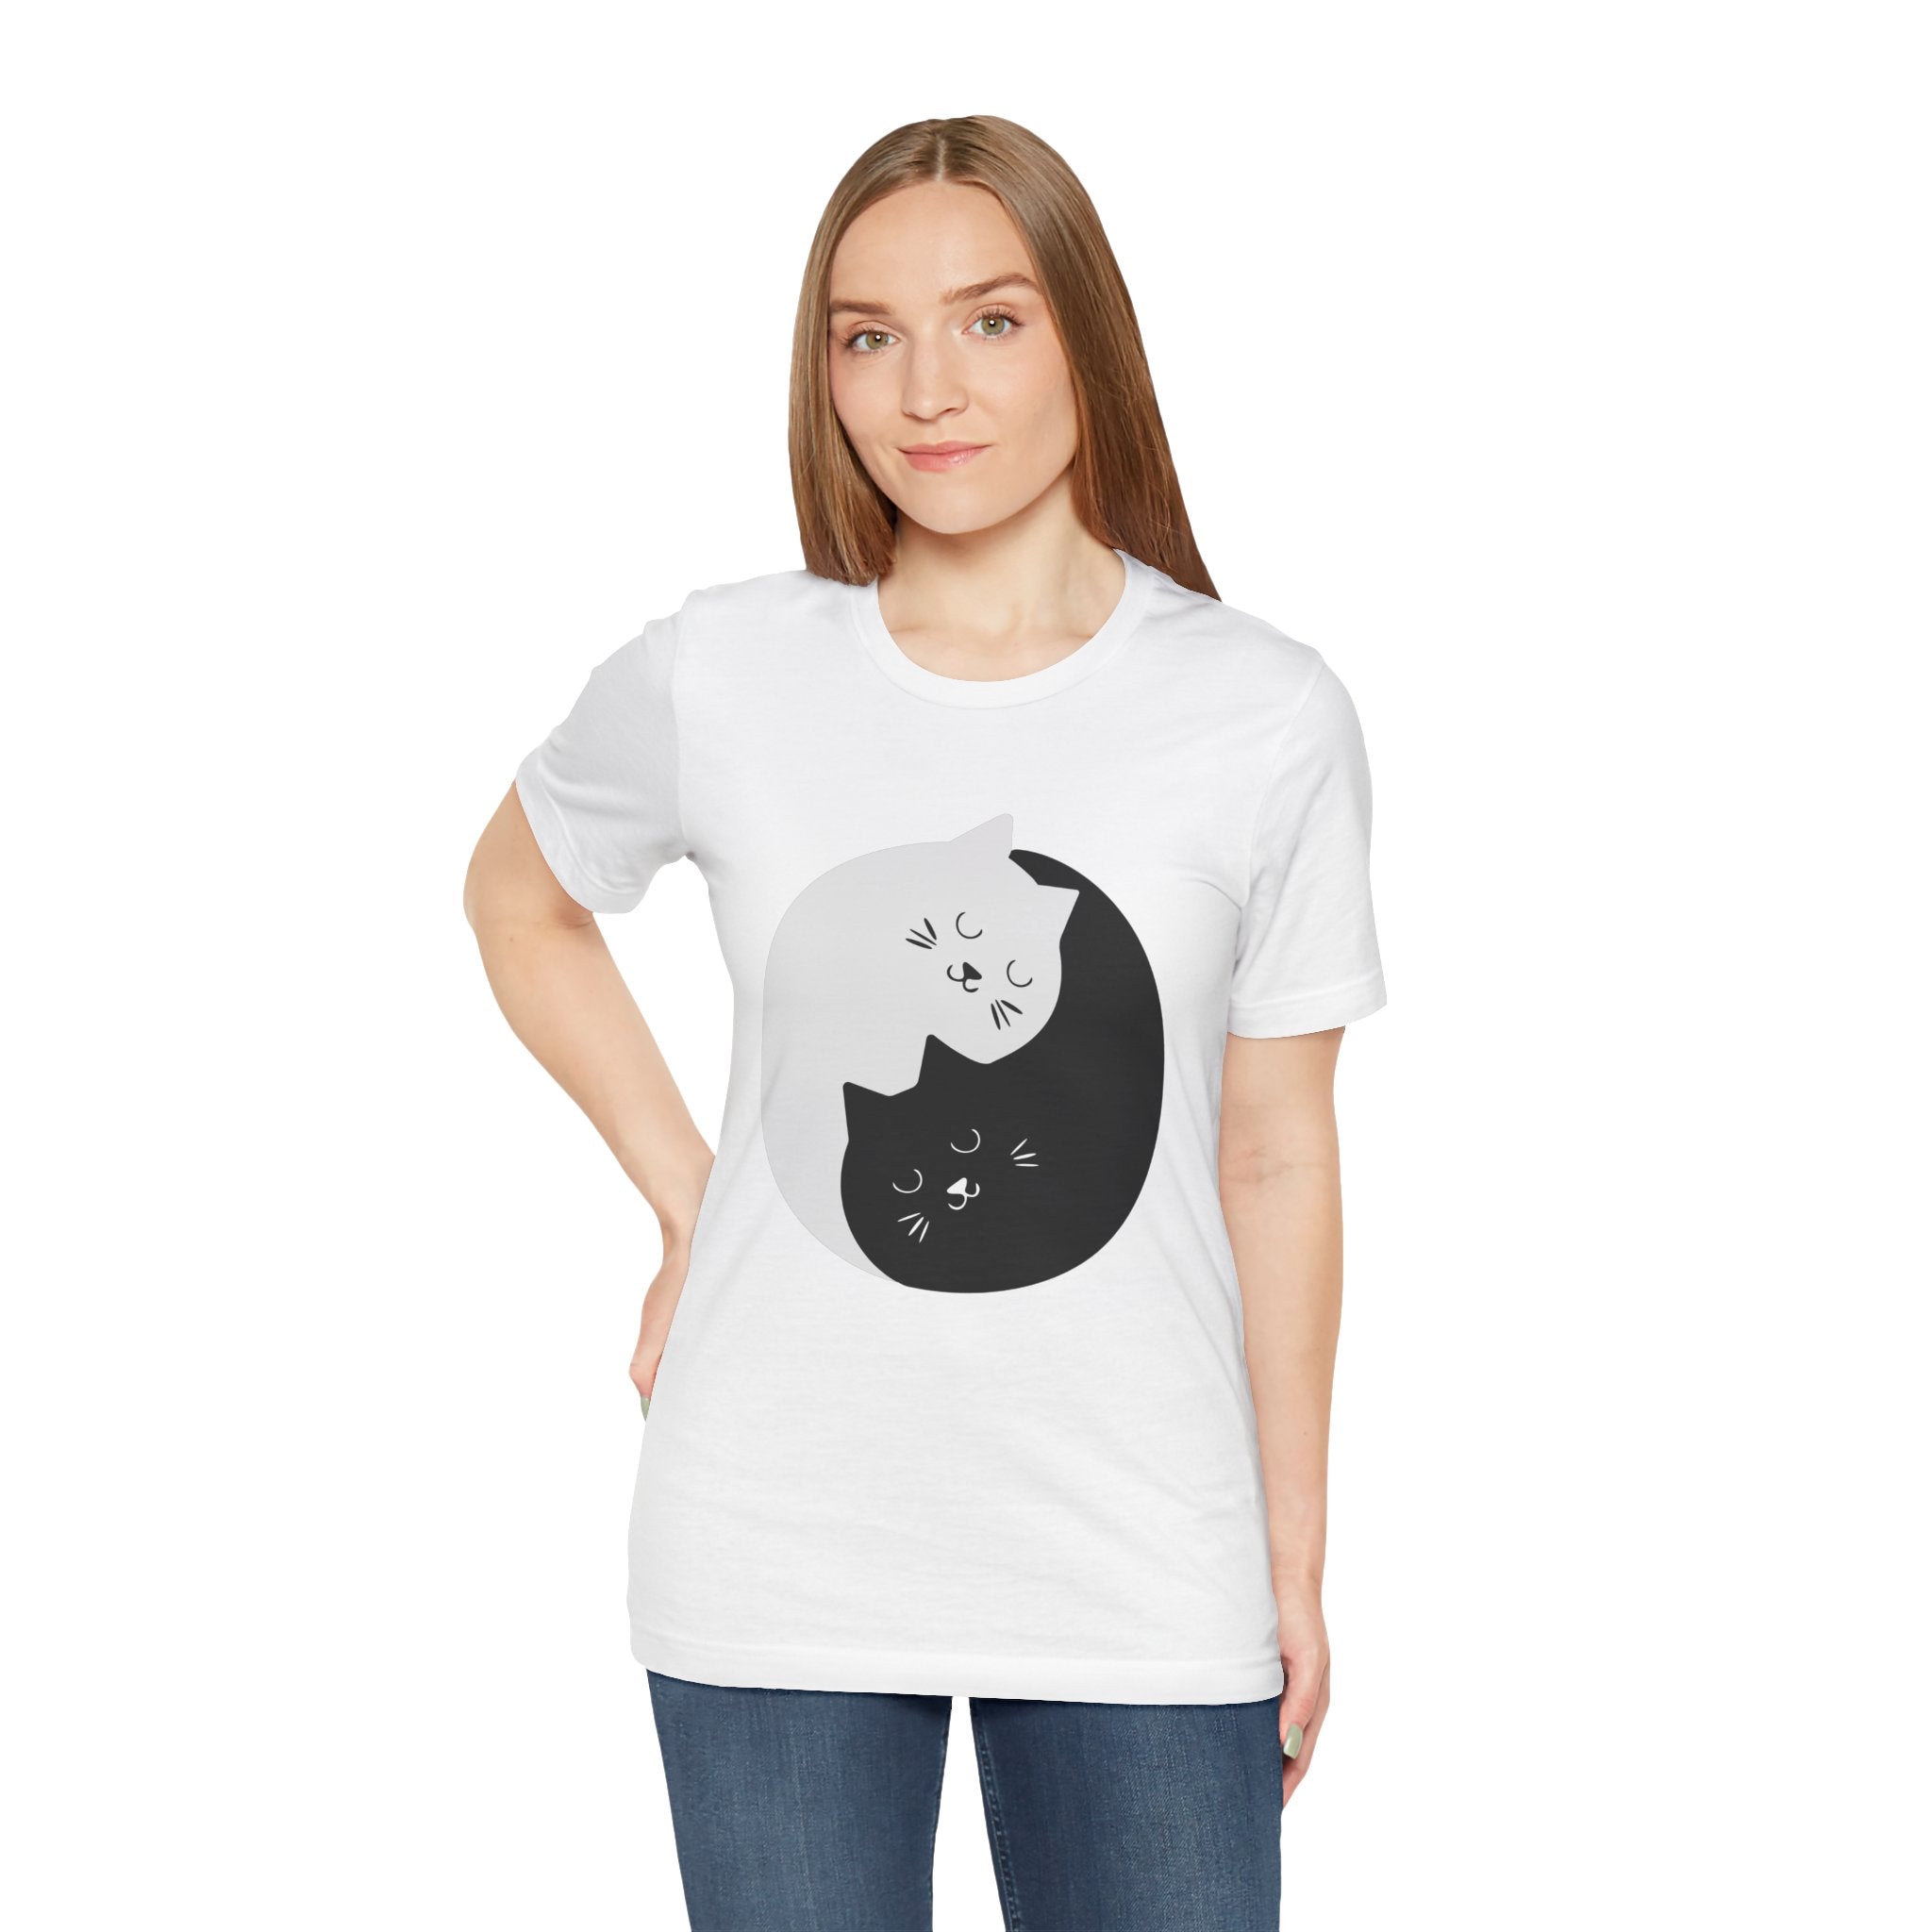 Young woman wearing a soft cotton, white unisex tee with a graphic of two cats, one black and one white, in a YING-ANG KITTIES T-Shirt design.